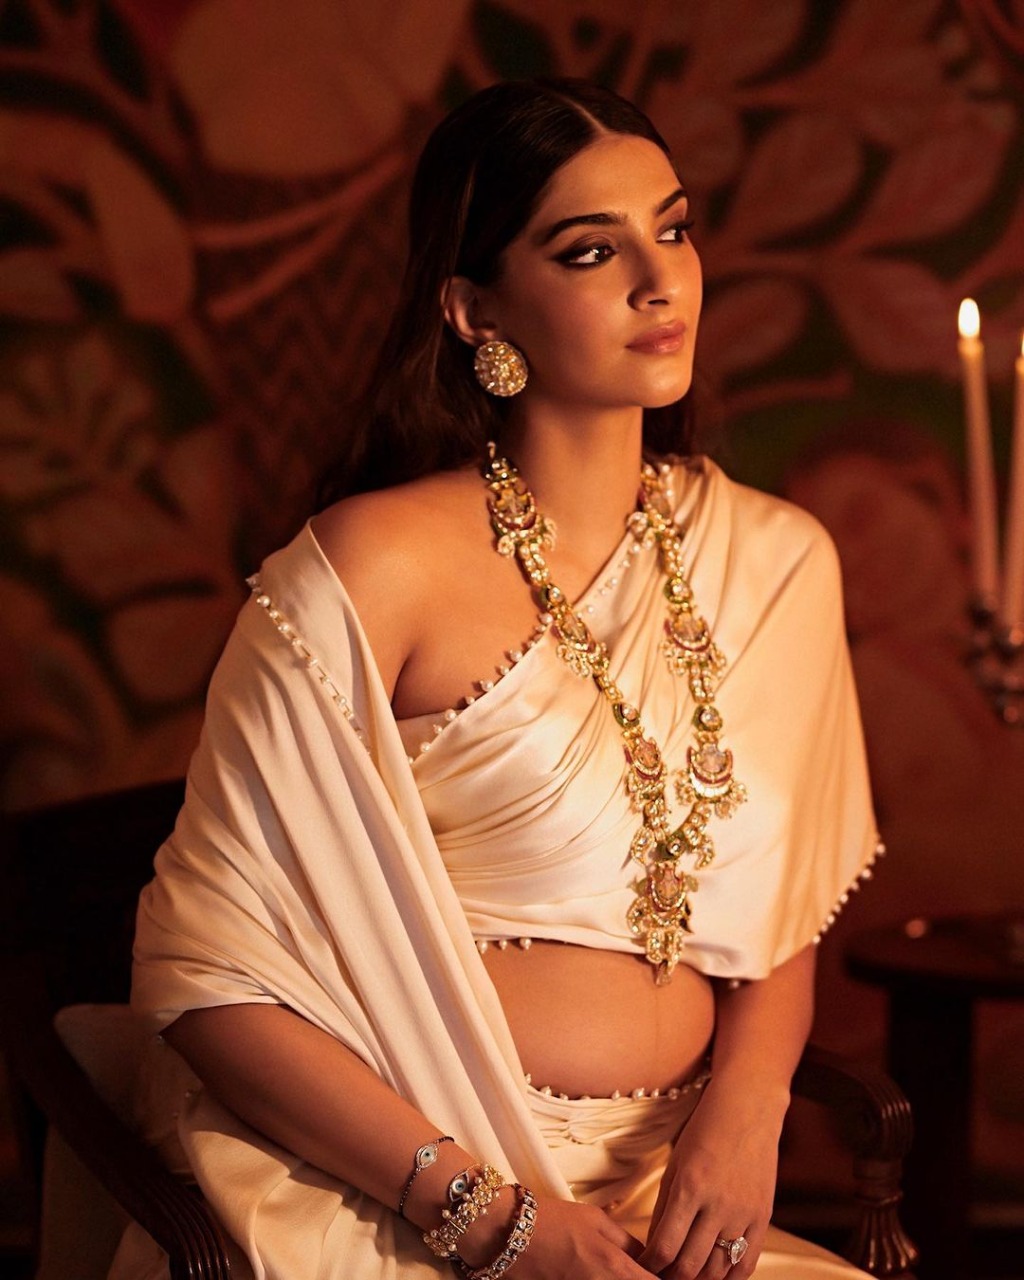 Sonam Kapoor shared New Photoshoot pictures with her baby bump